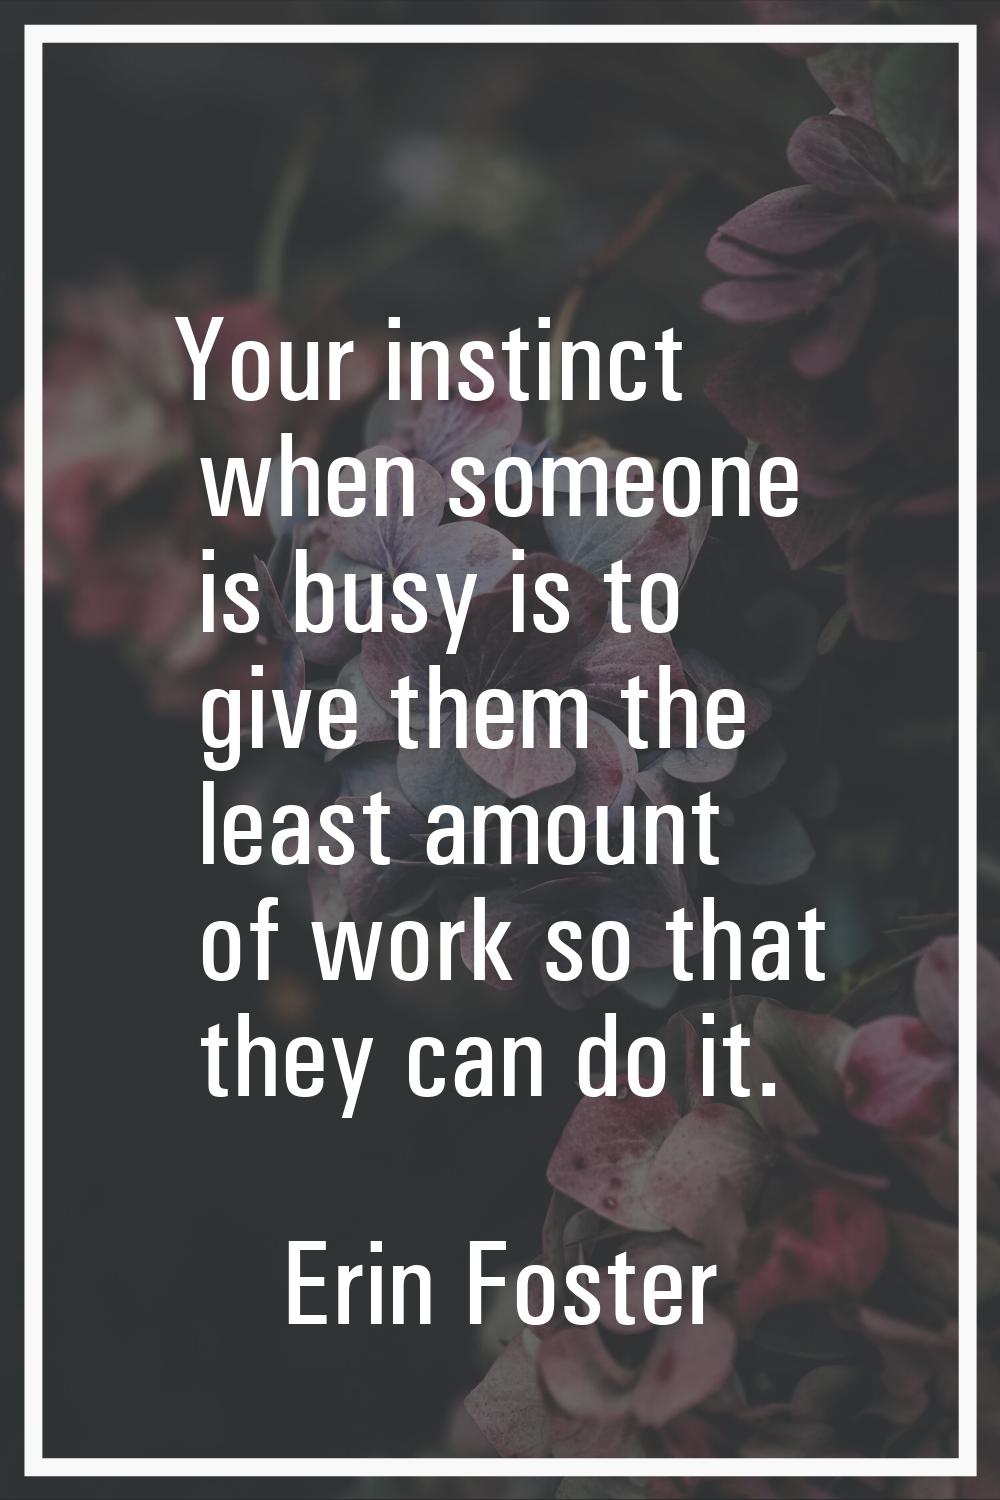 Your instinct when someone is busy is to give them the least amount of work so that they can do it.